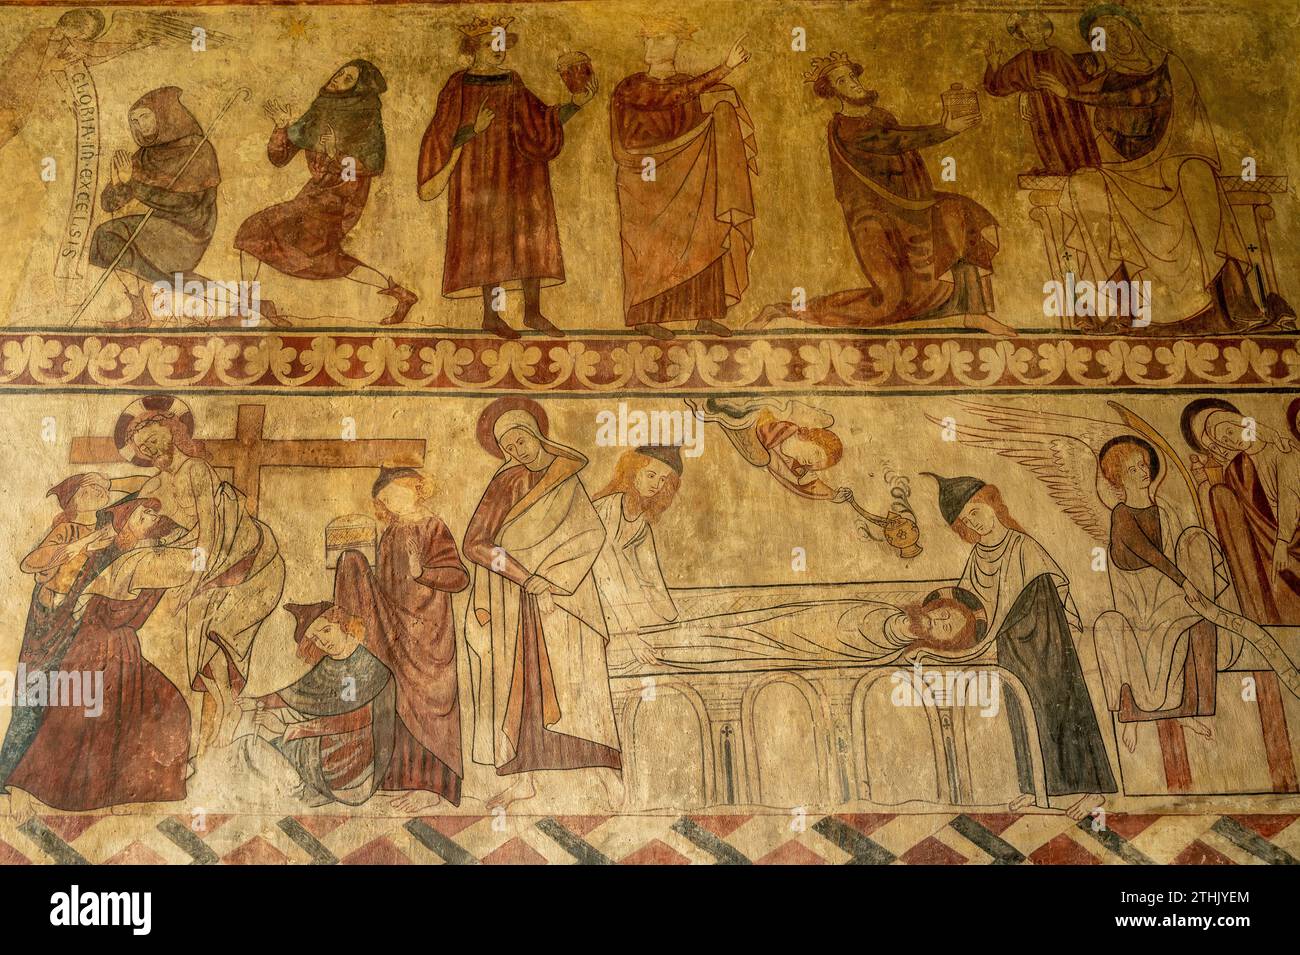 St Agatha's wall paintings at Easby Abbey in England Stock Photo